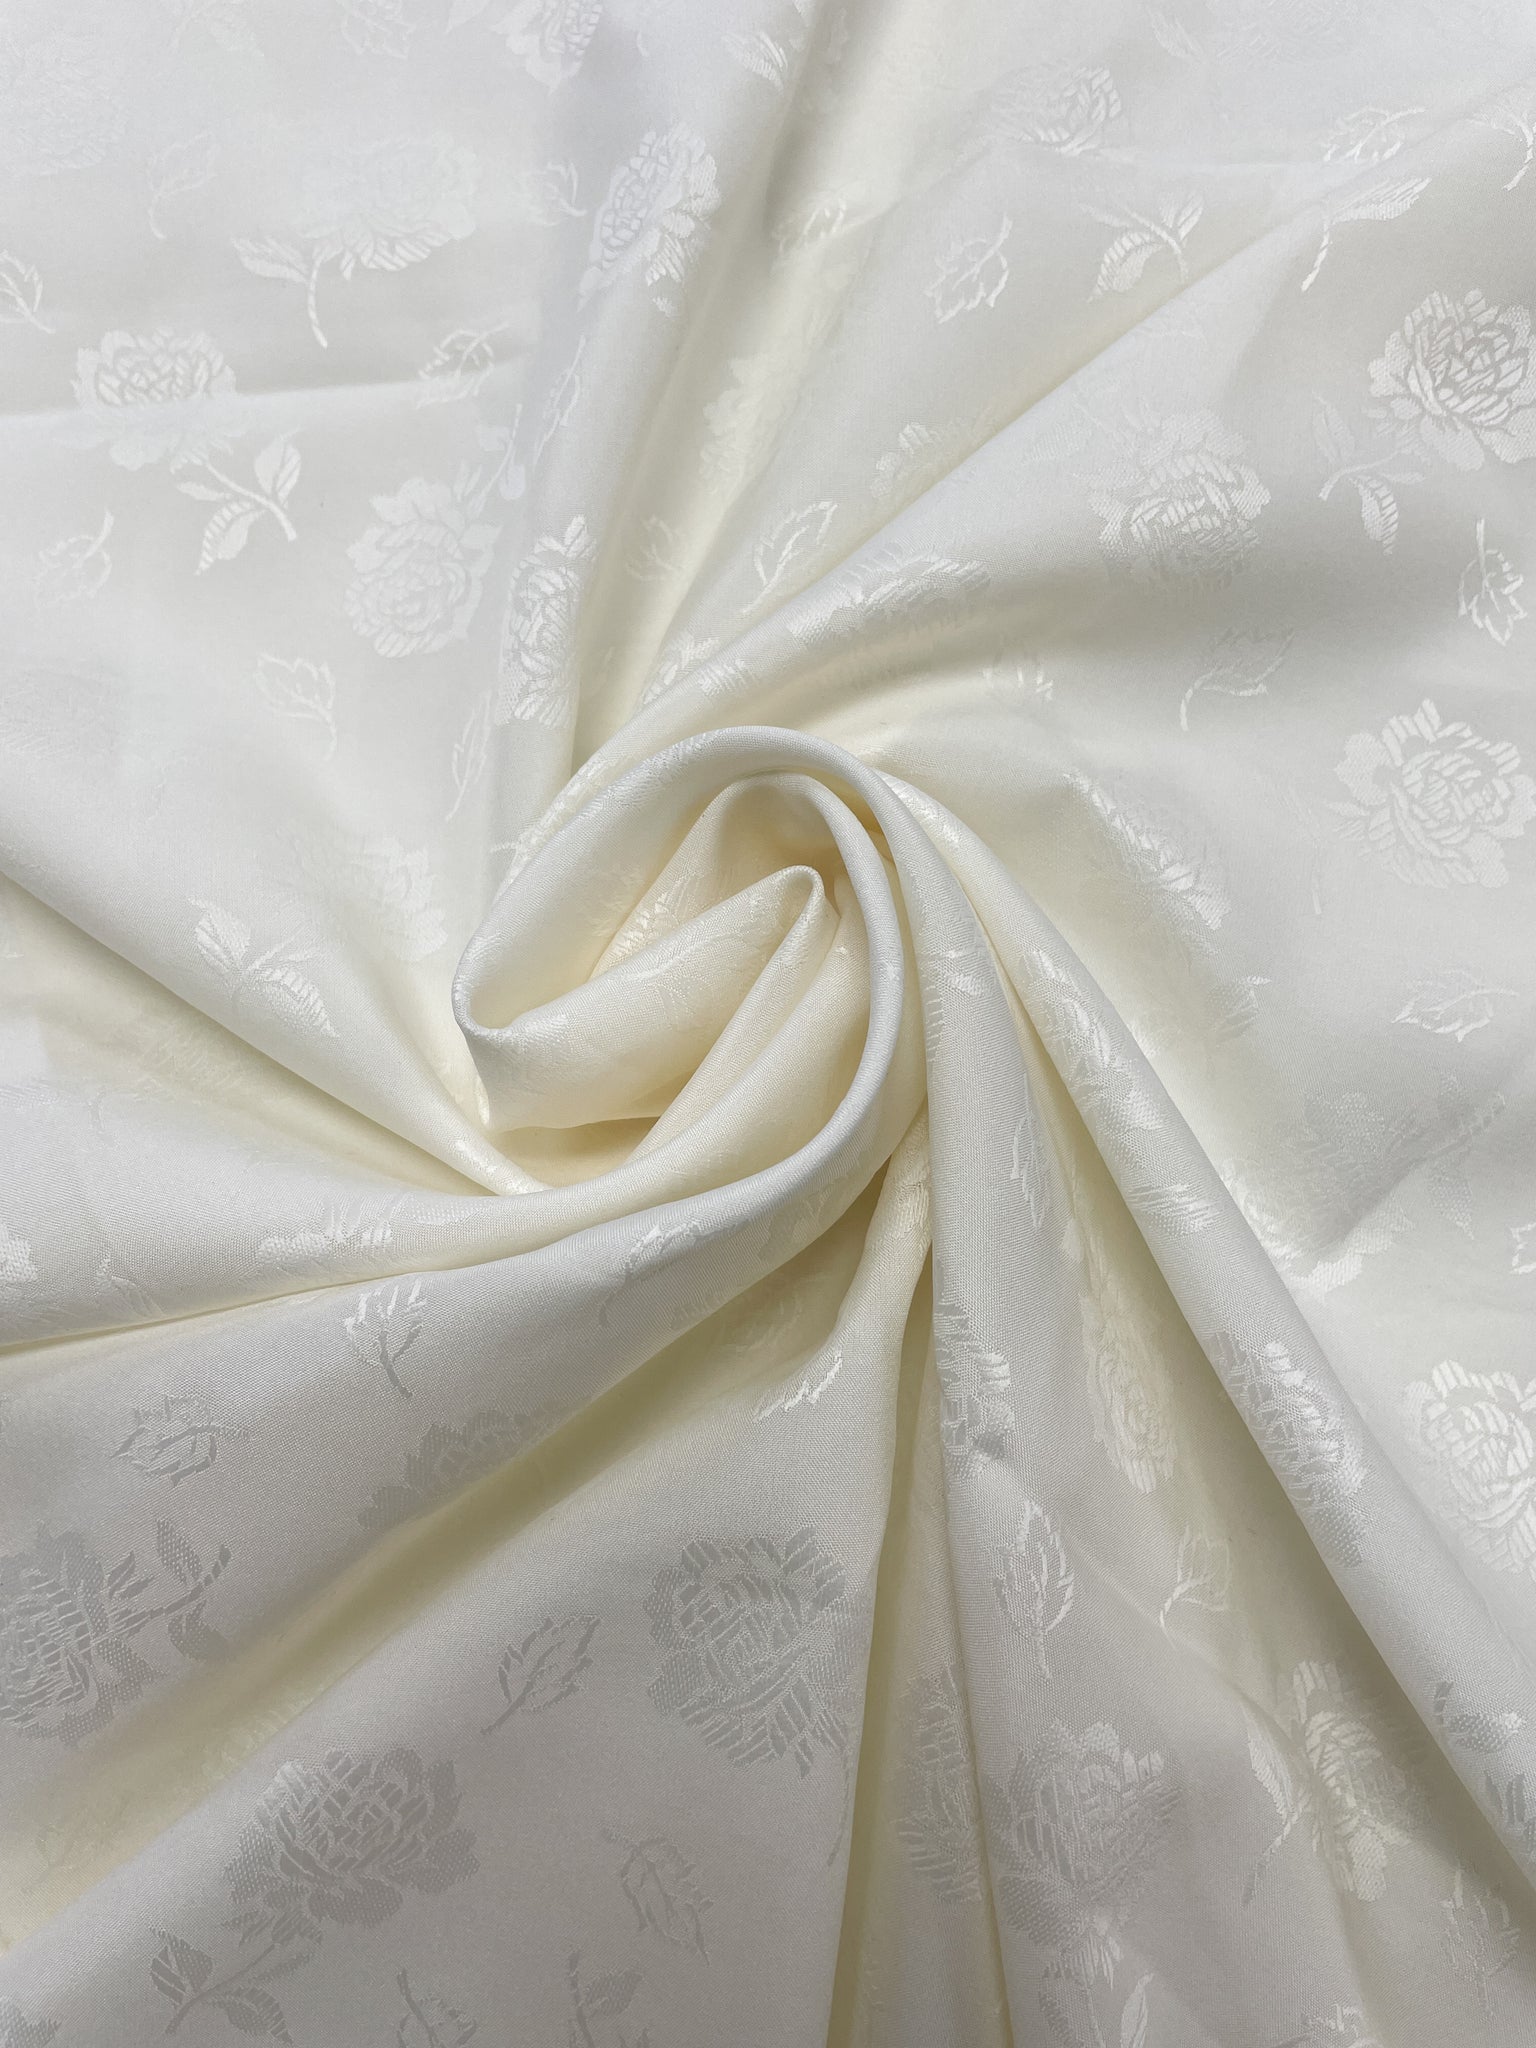 2 YD Polyester Floral Jacquard - Off White